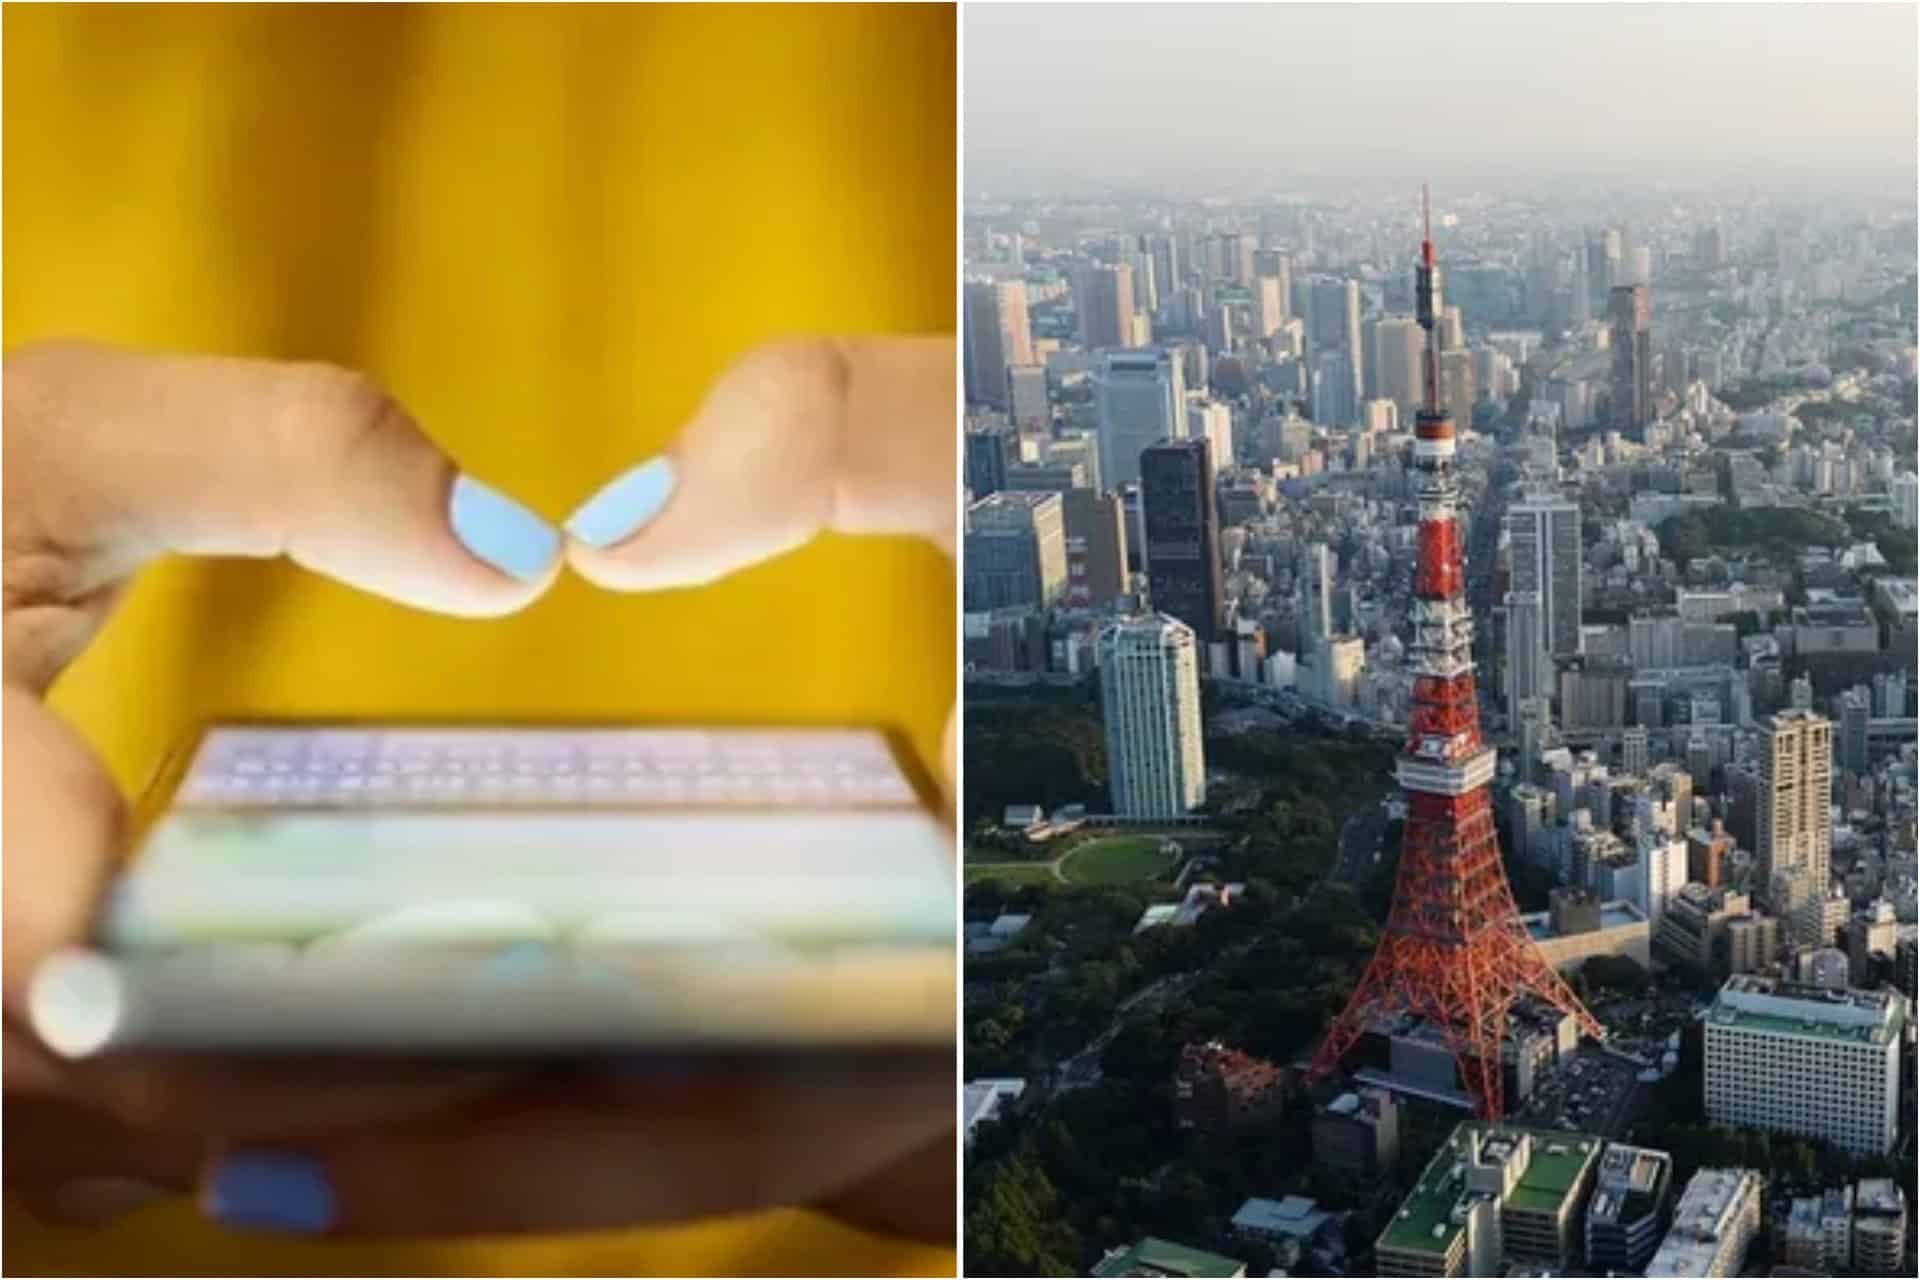 World record 420,000,000 Mbps internet speed has been hit in Japan